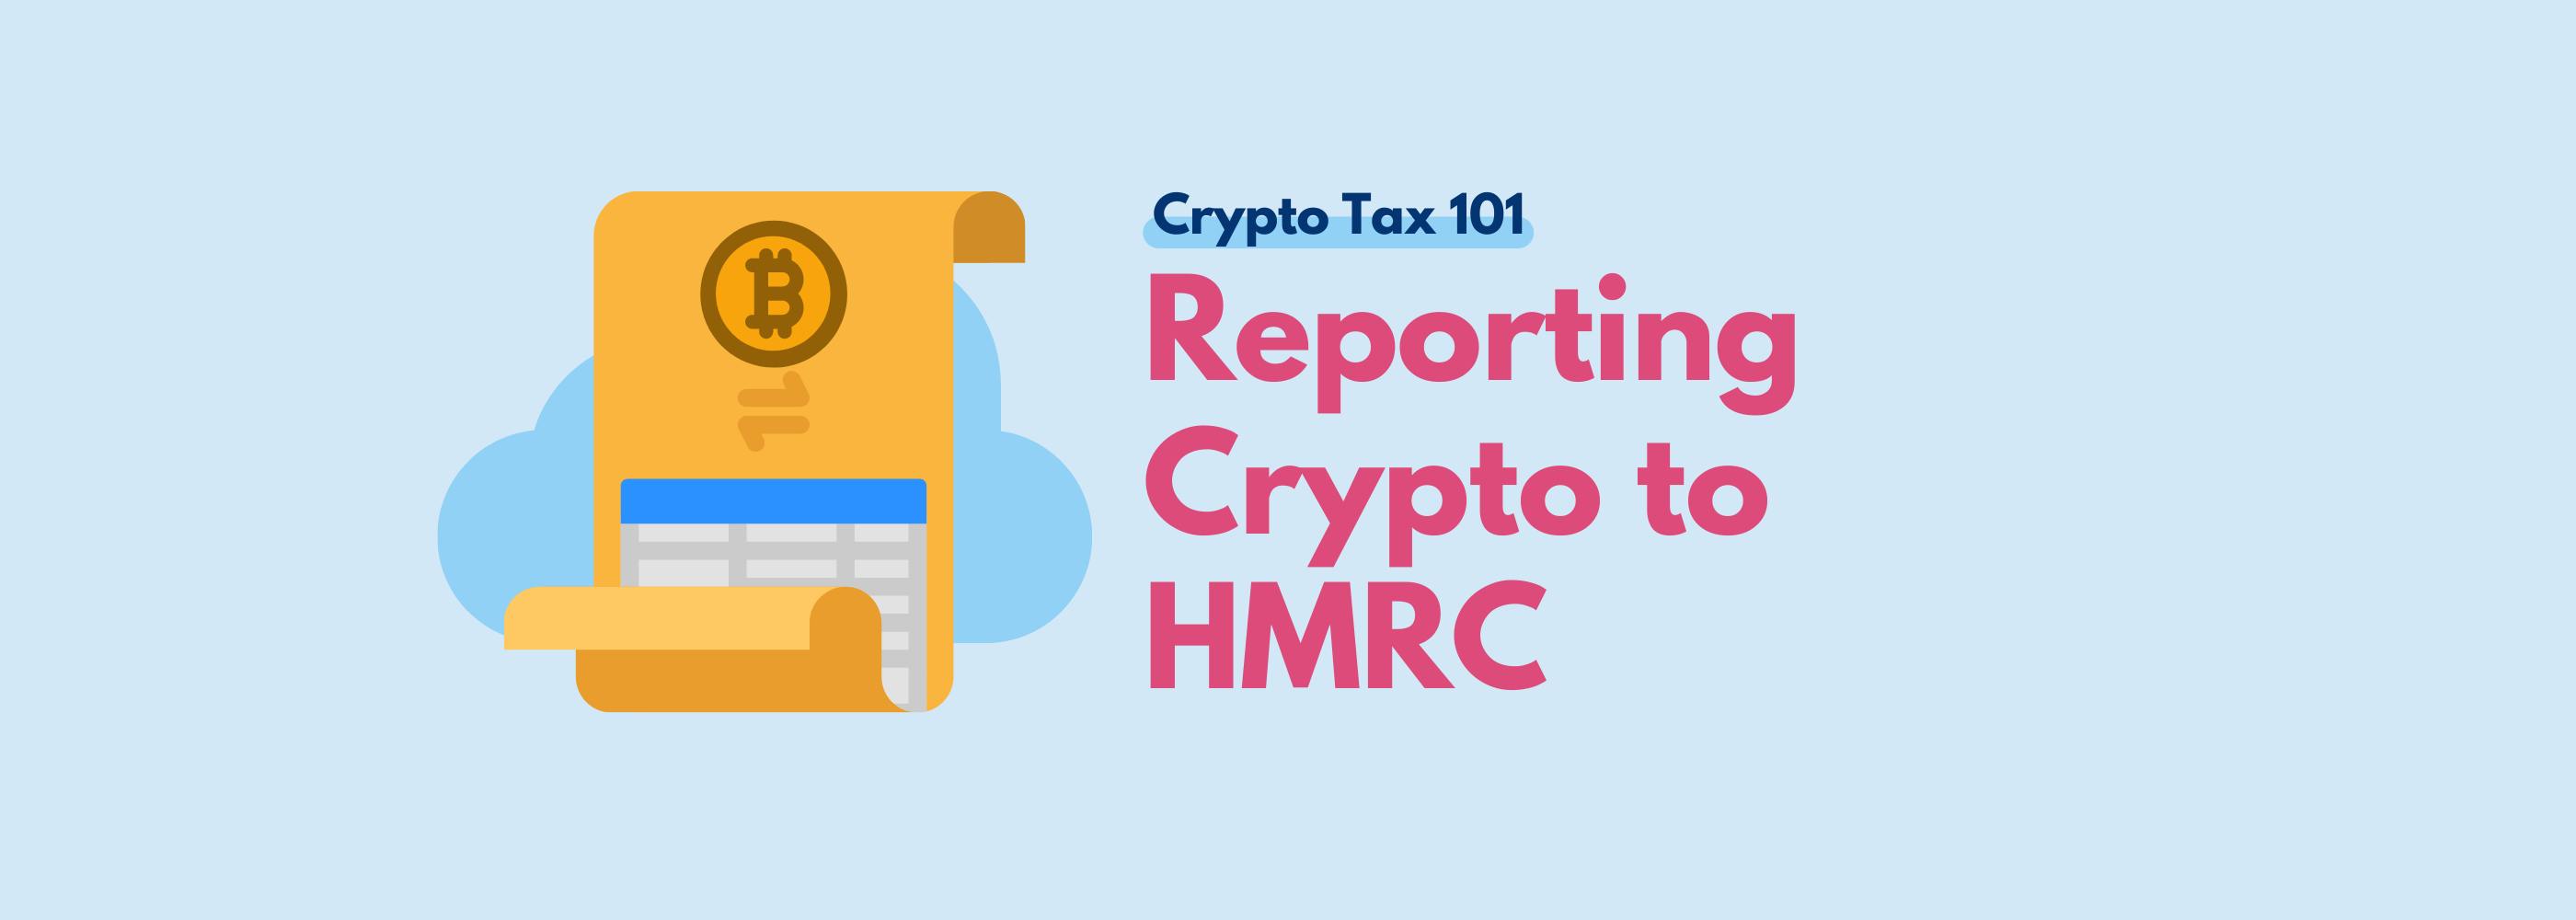 how-to-report-cryptocurrency-to-hmrc-koinly